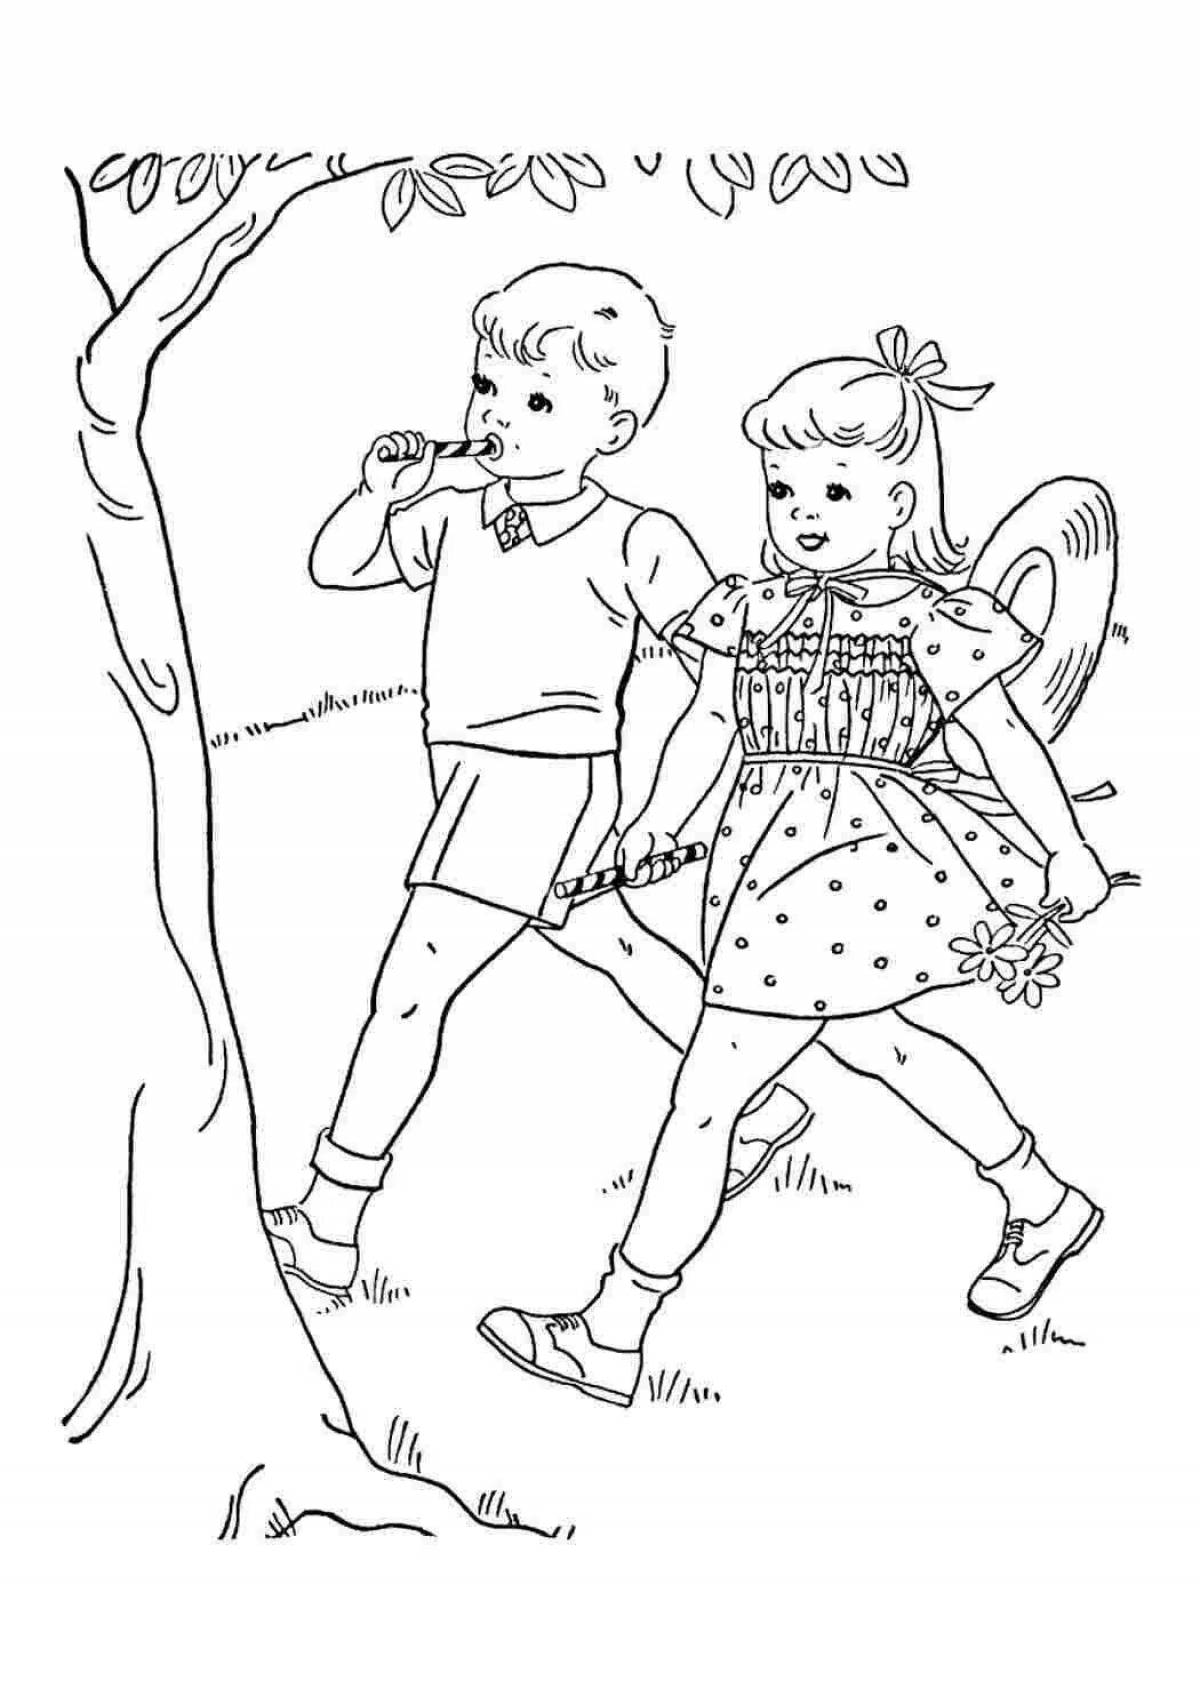 Violent brother and sister coloring book